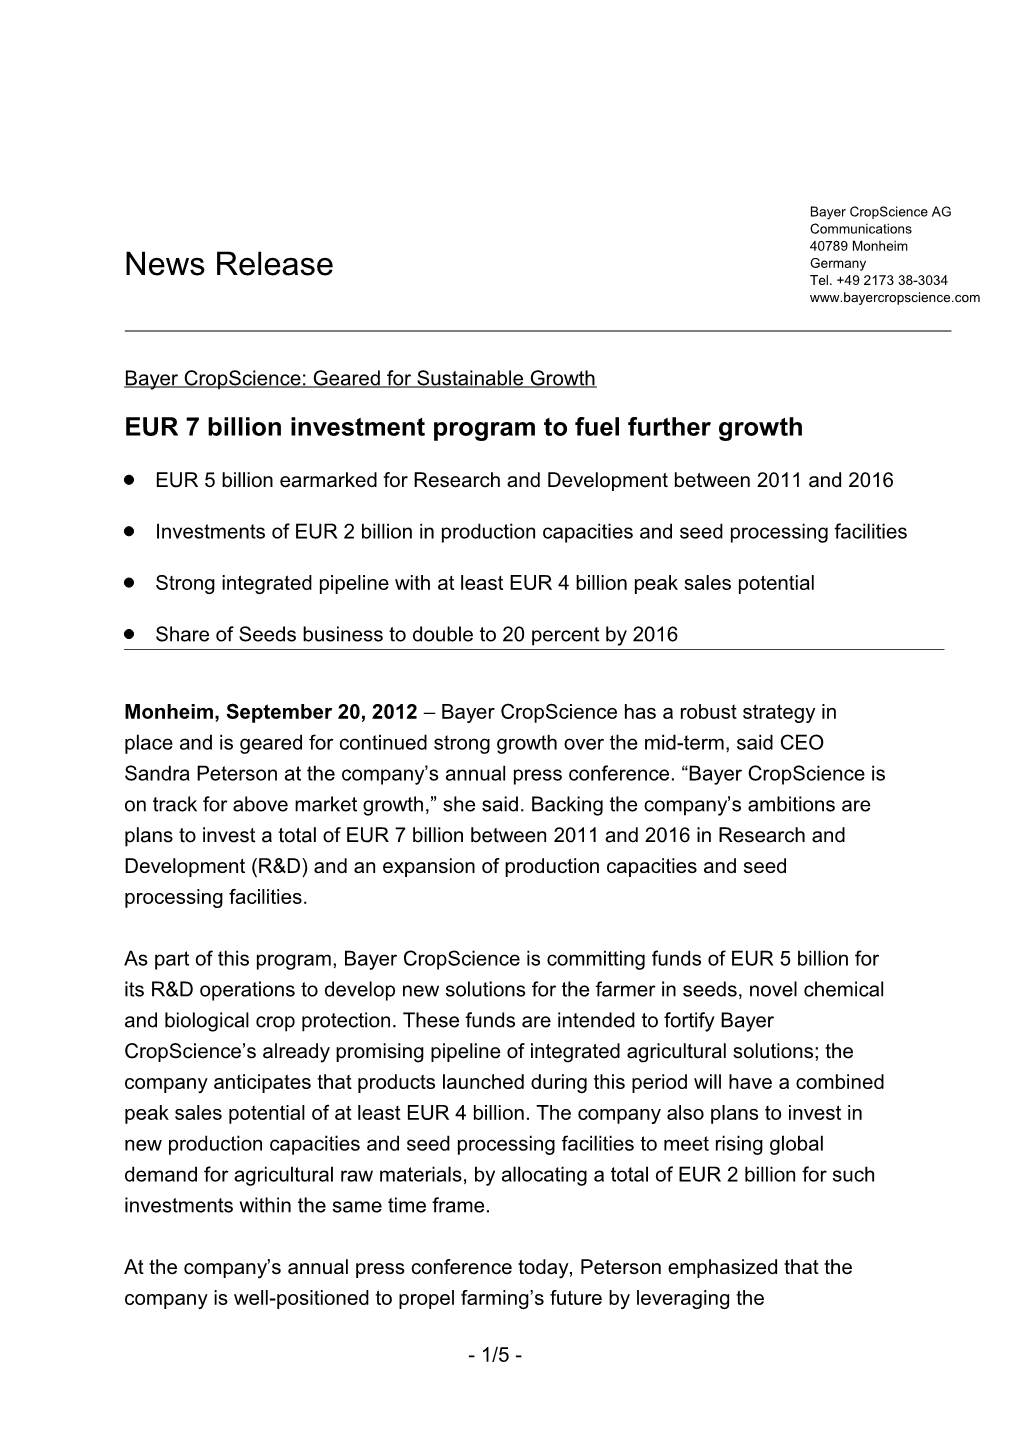 EUR 7 Billion Investment Program to Fuel Further Growth